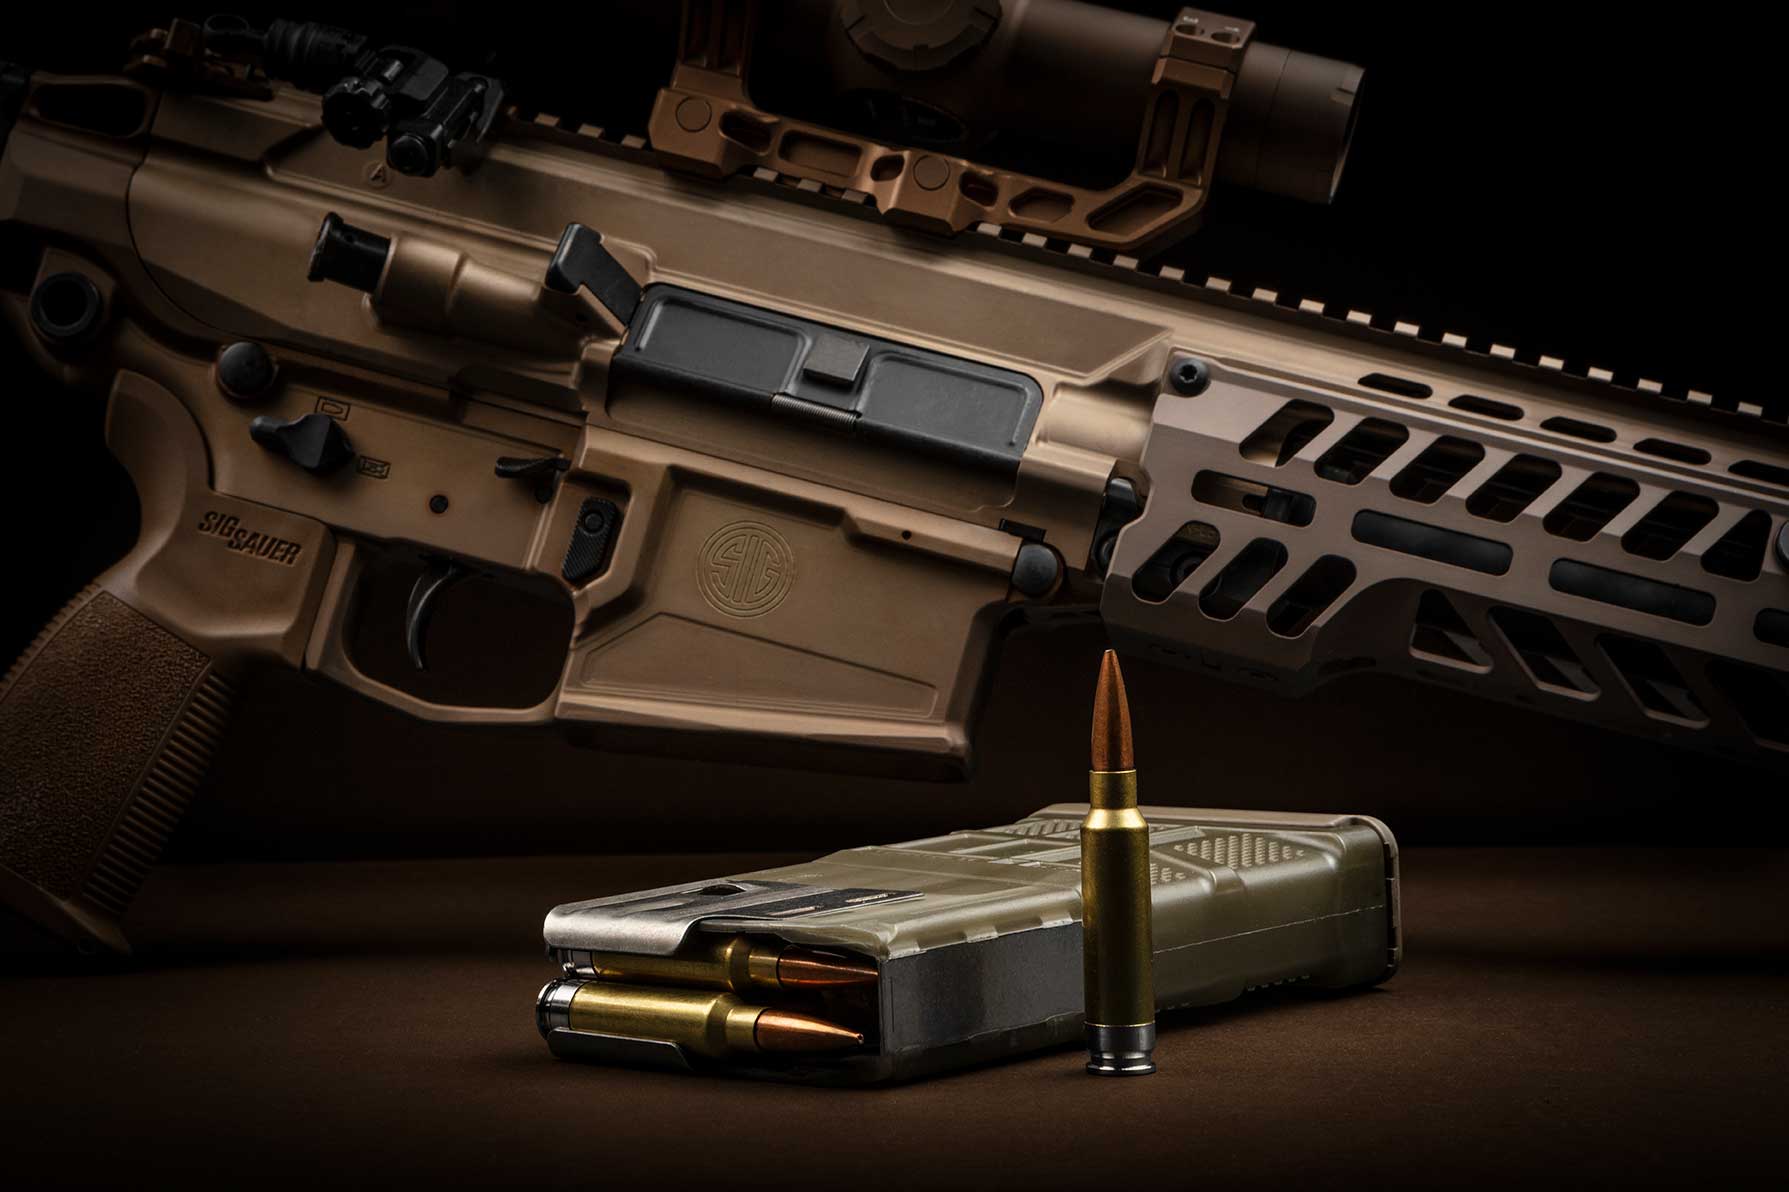 the Army’s new rifle from SIG Sauer